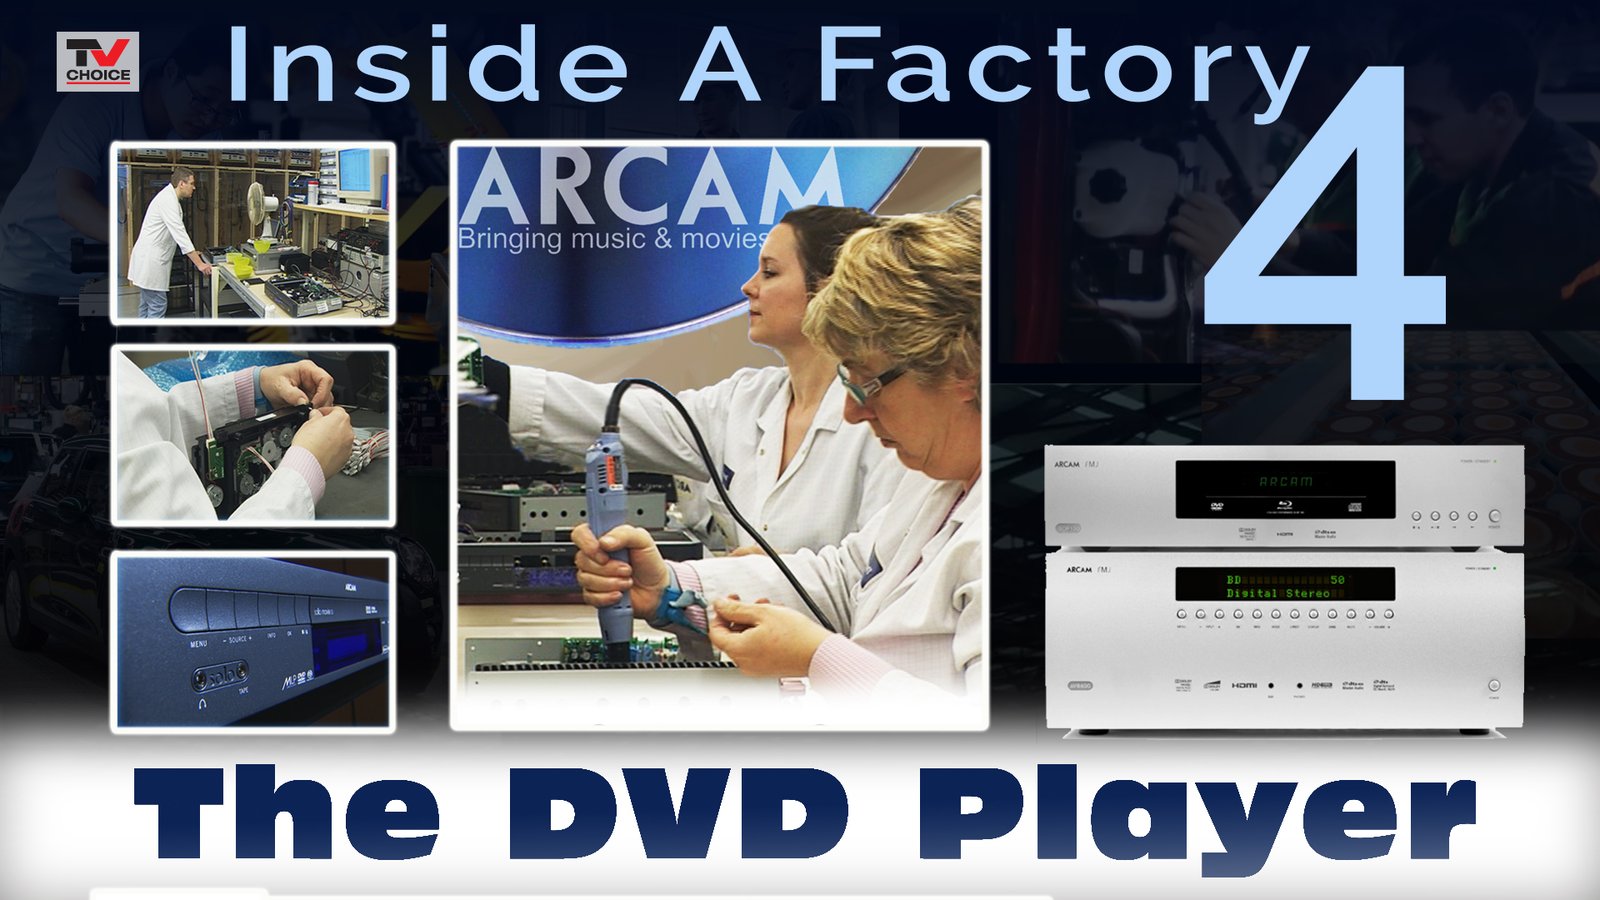 Inside A Factory 4: The DVD Player